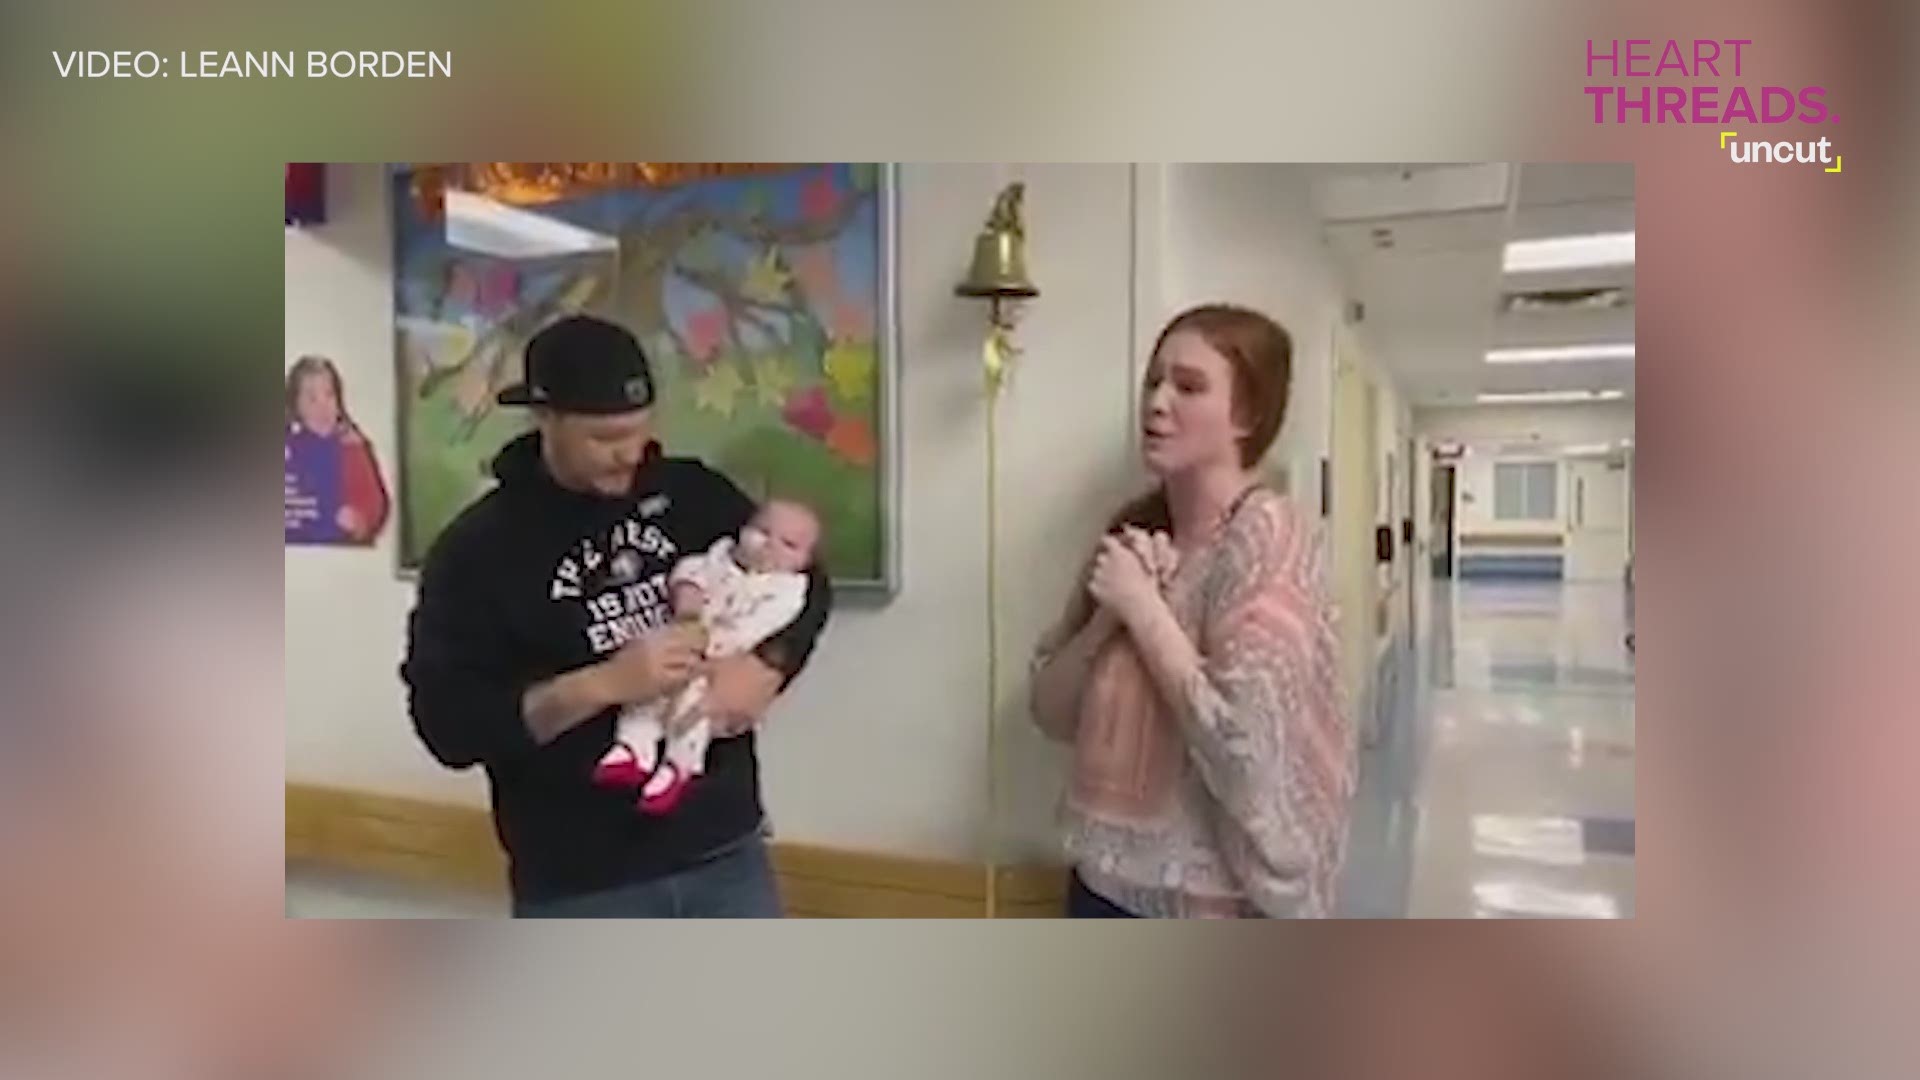 Watch baby Lillian 'ring' the cancer bell after her mom gives a heartfelt thank you to the doctors and nurses who saved Lillian's life.